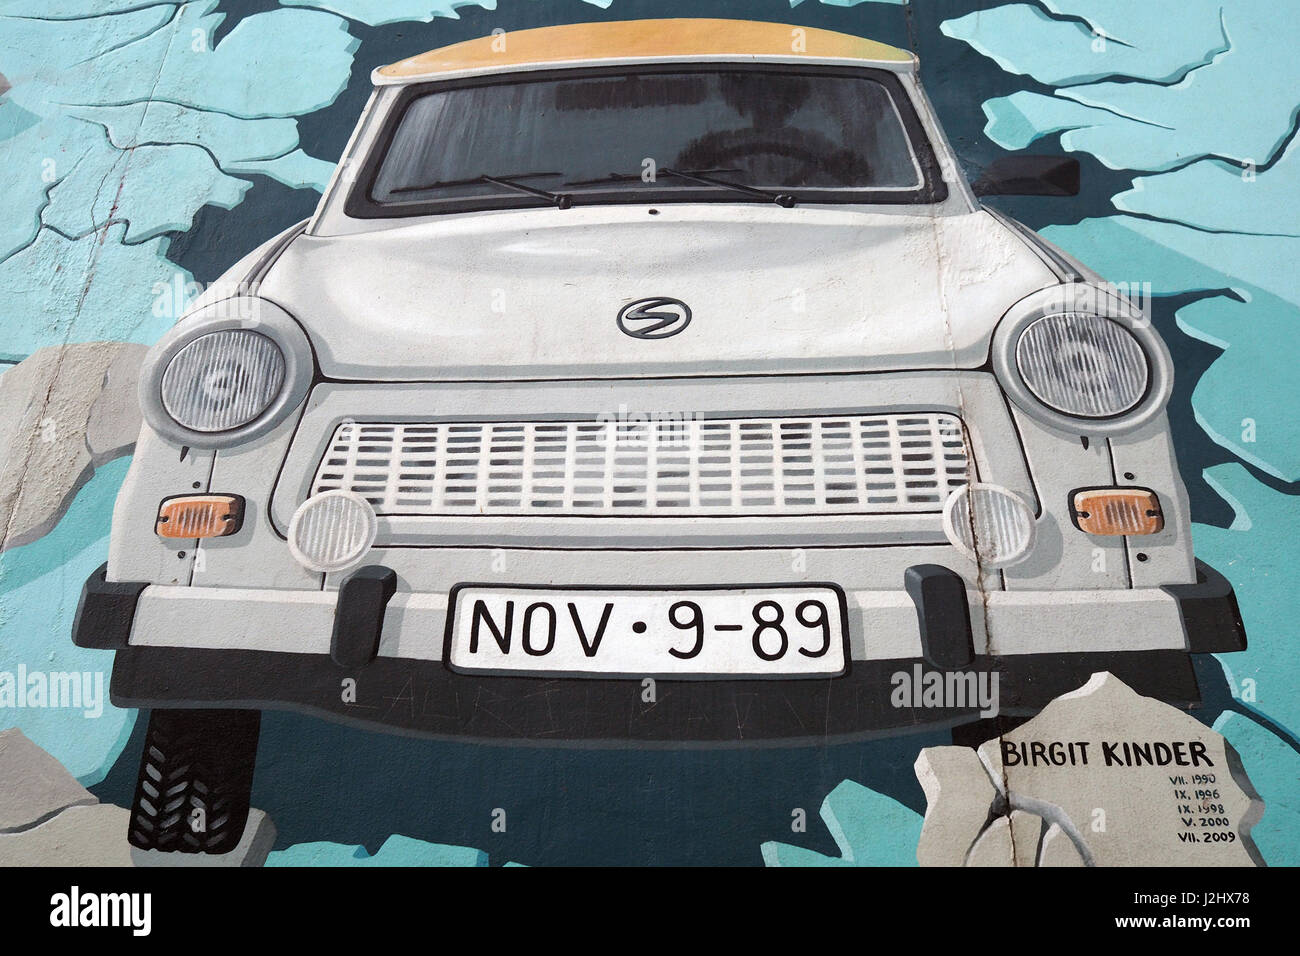 Graffiti representing the Trabant,the most popular car in East Germany,in the famous section of Berlin Wall (berliner mauer) named 'East Side Gallery' Stock Photo